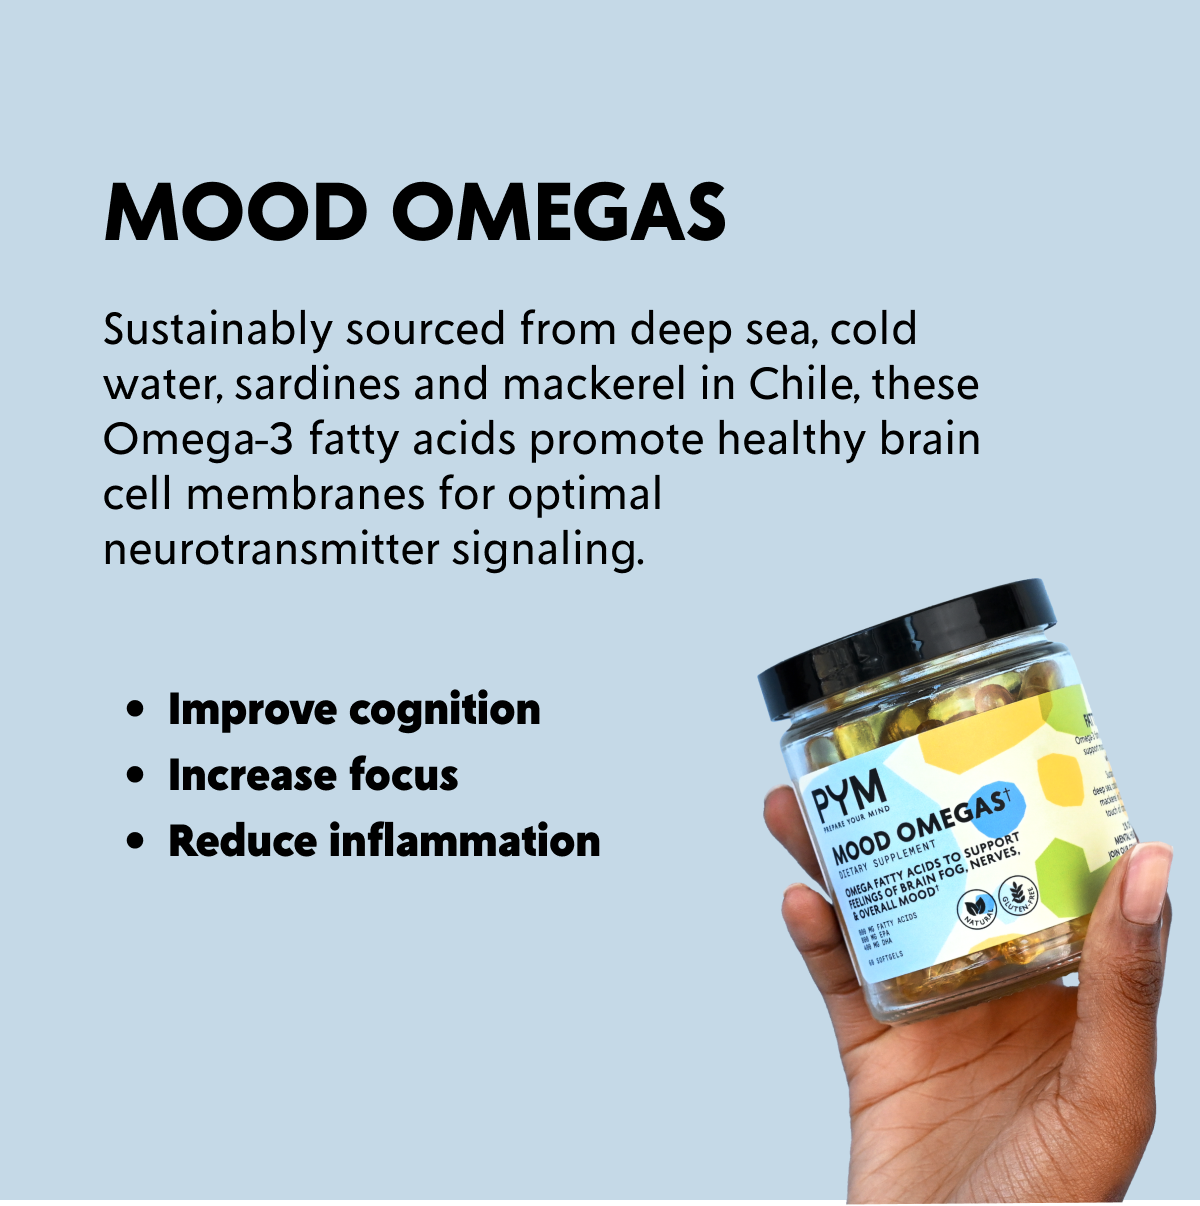 Mood Omegas for mental well-being